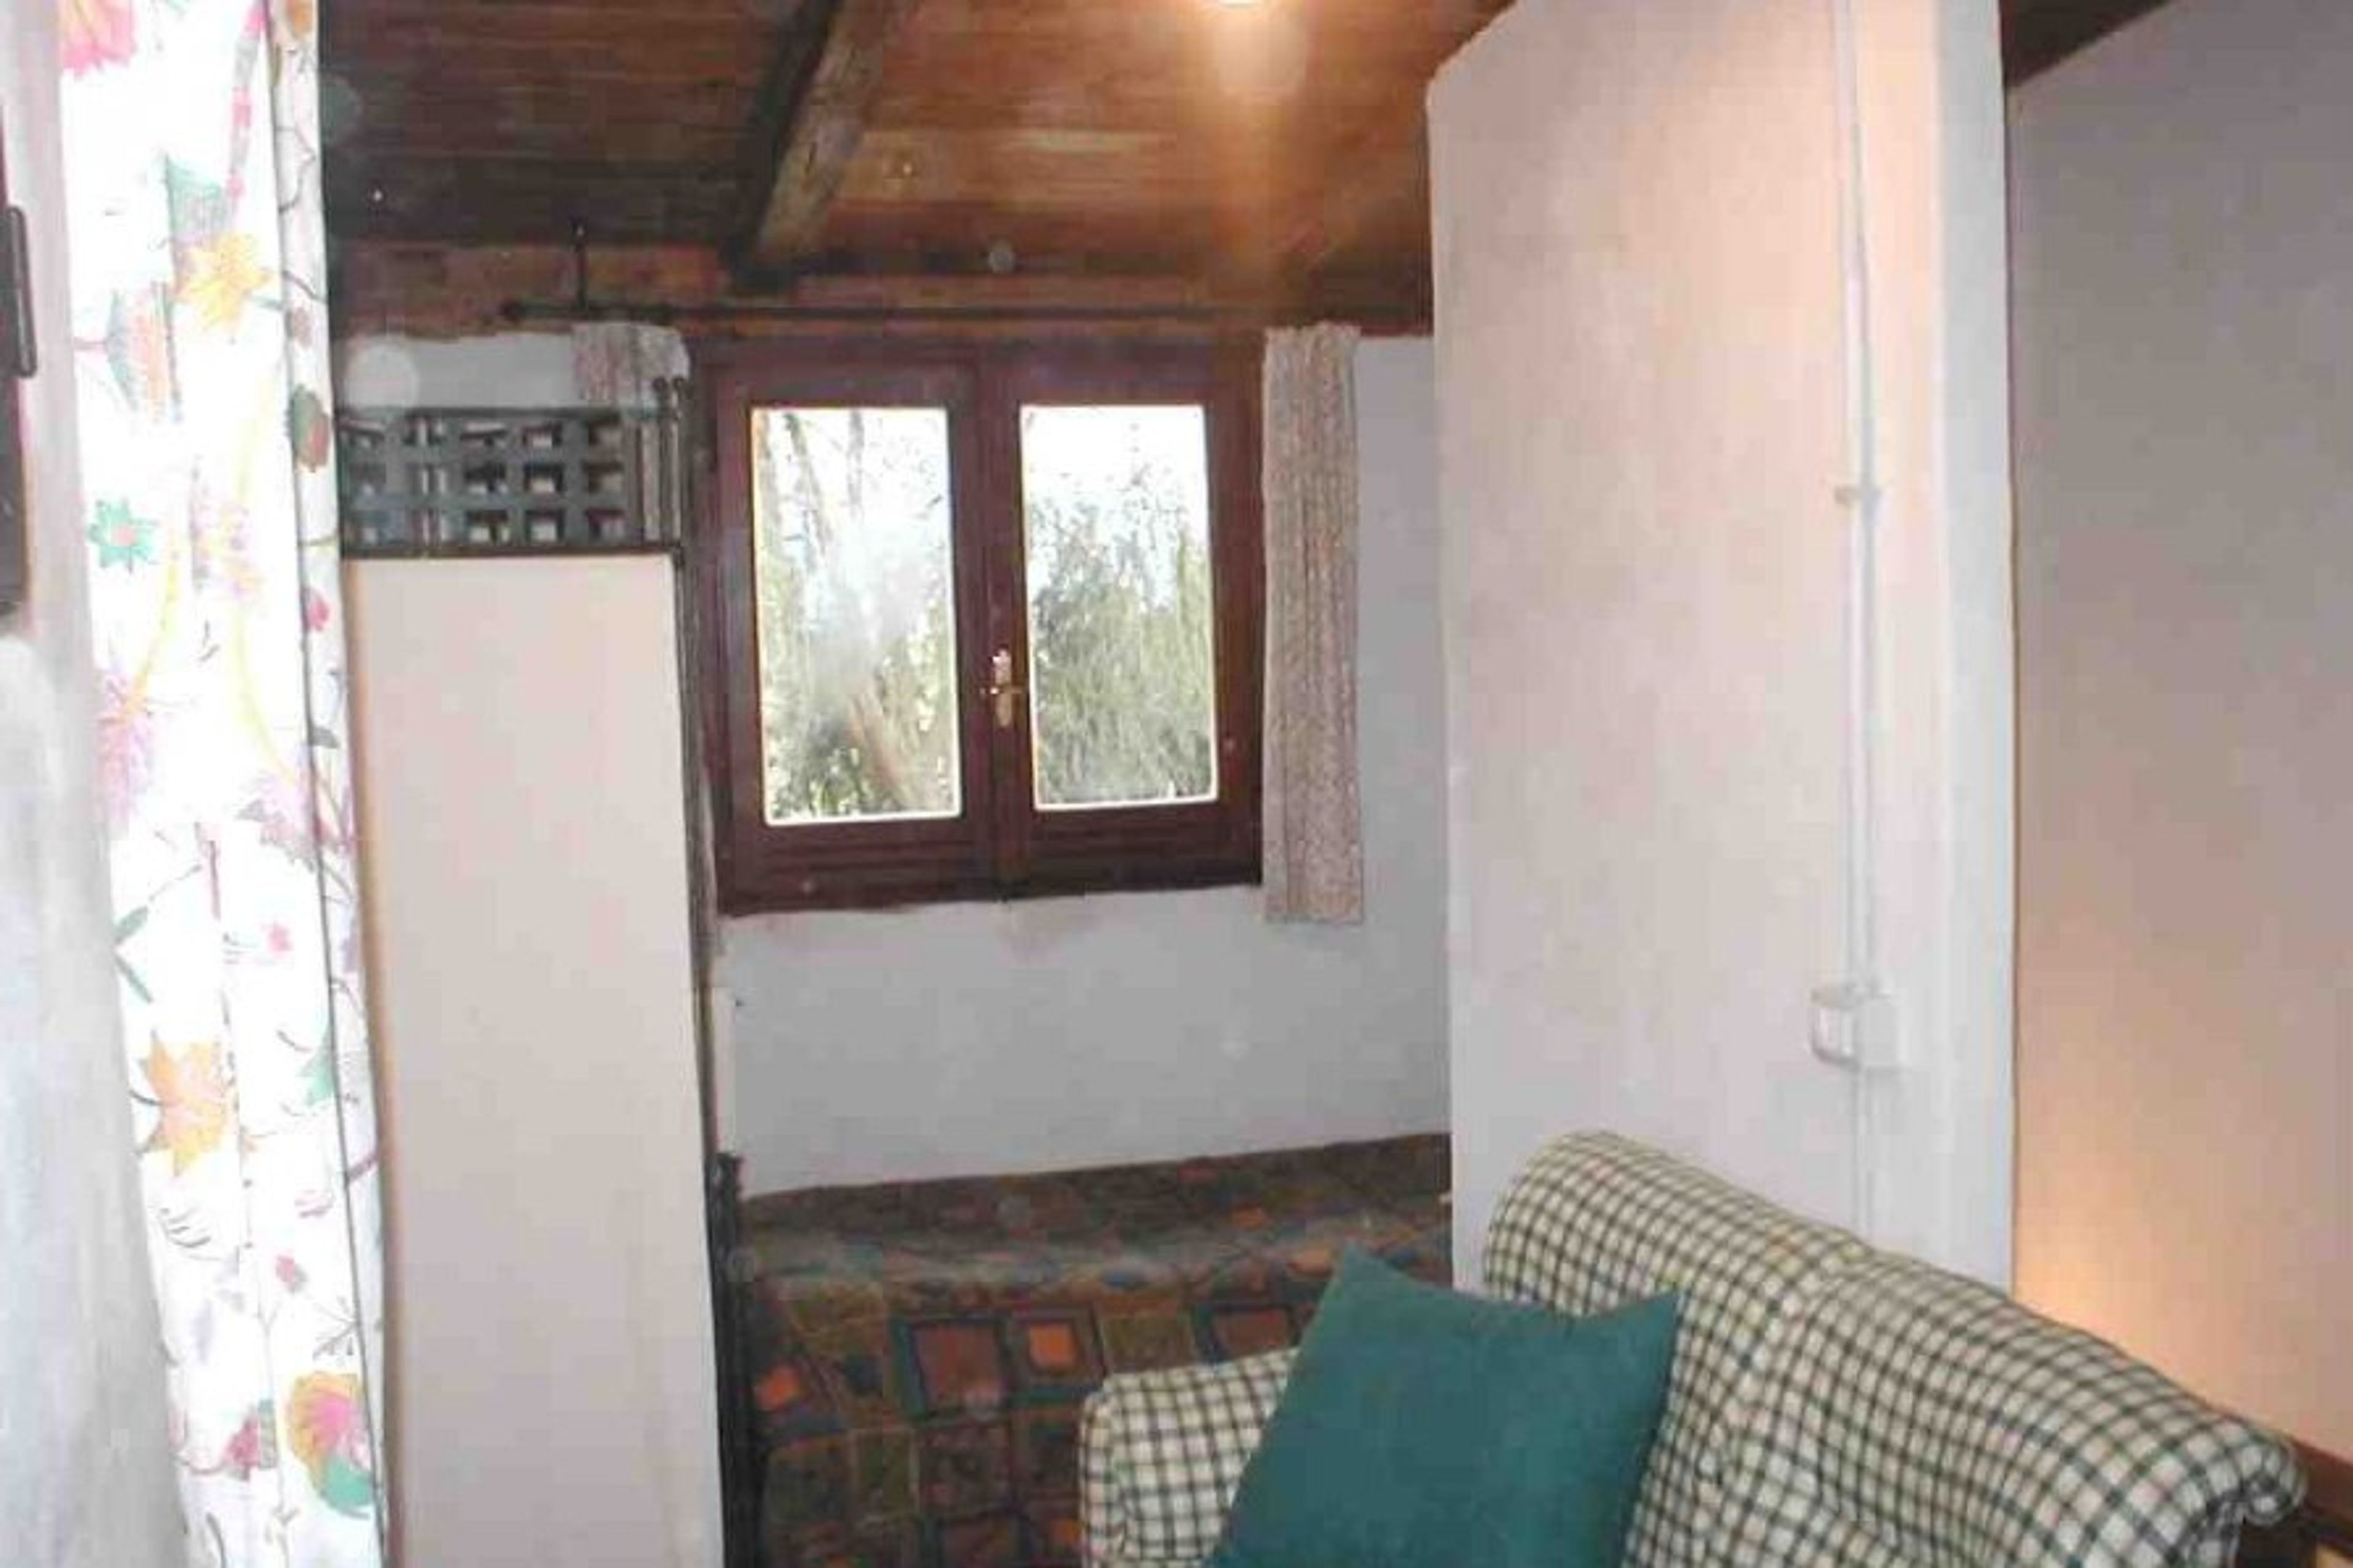 single bed in alcove on the loft upstairs
